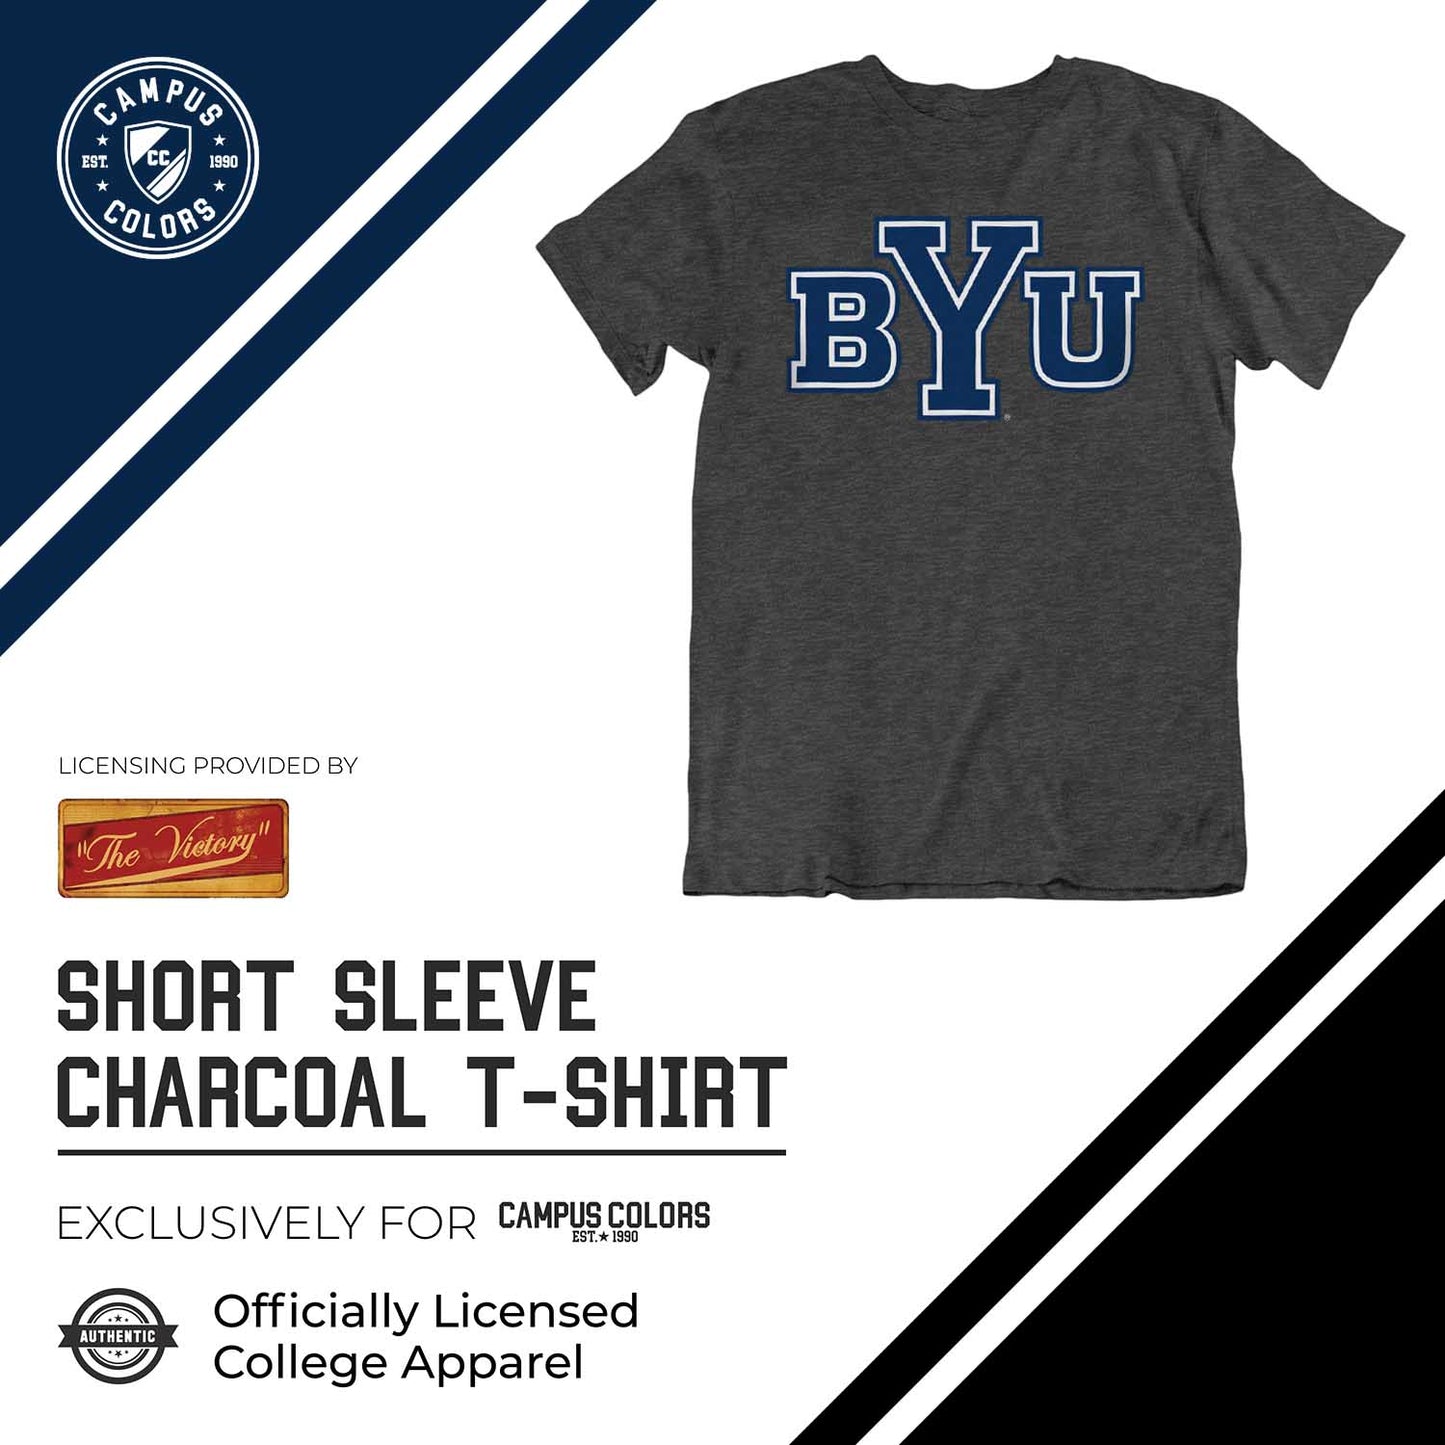 BYU Cougars Campus Colors NCAA Adult Cotton Blend Charcoal Tagless T-Shirt - Charcoal